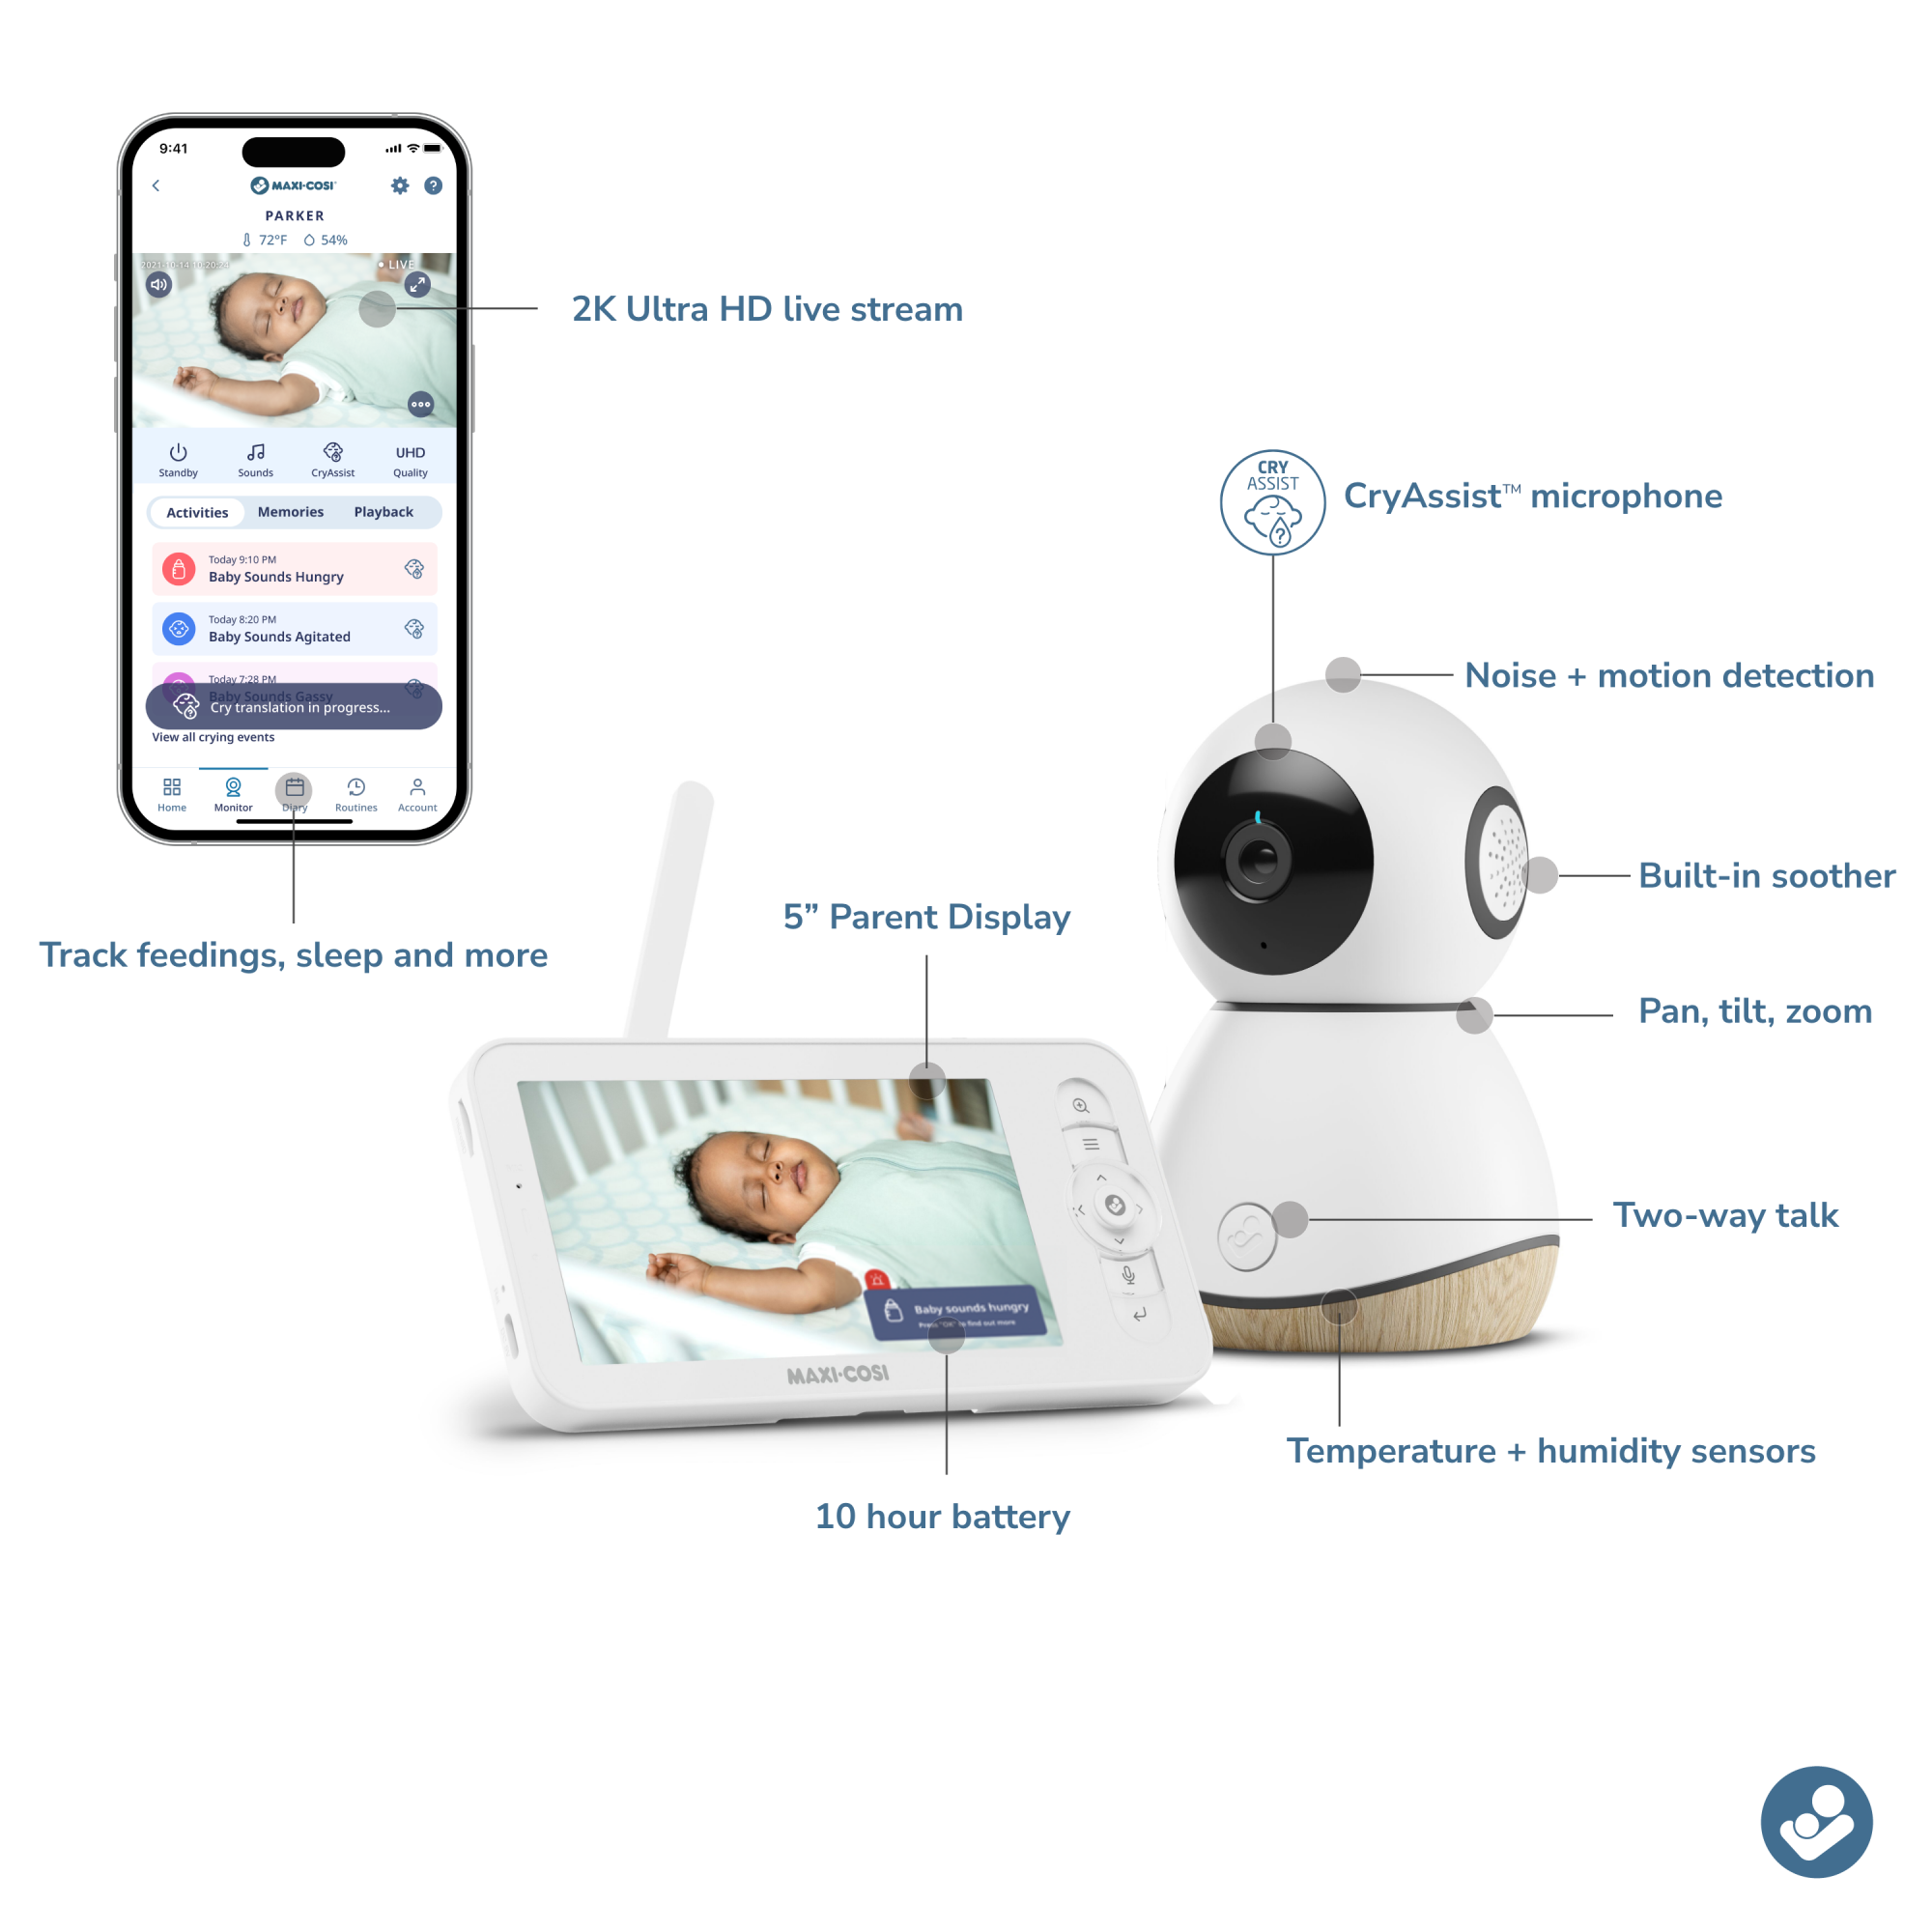 See Pro 360° Baby Monitor - infographic displaying features: 2k Ultra HD live stream, Track feedings, sleep and more, CryAssist microphone, Noise + motion detection, Built-in soother, Pan, tilt, zoom, Two-way talk, Temperature + humidity sensors, 10 hour battery, 5" Parent display